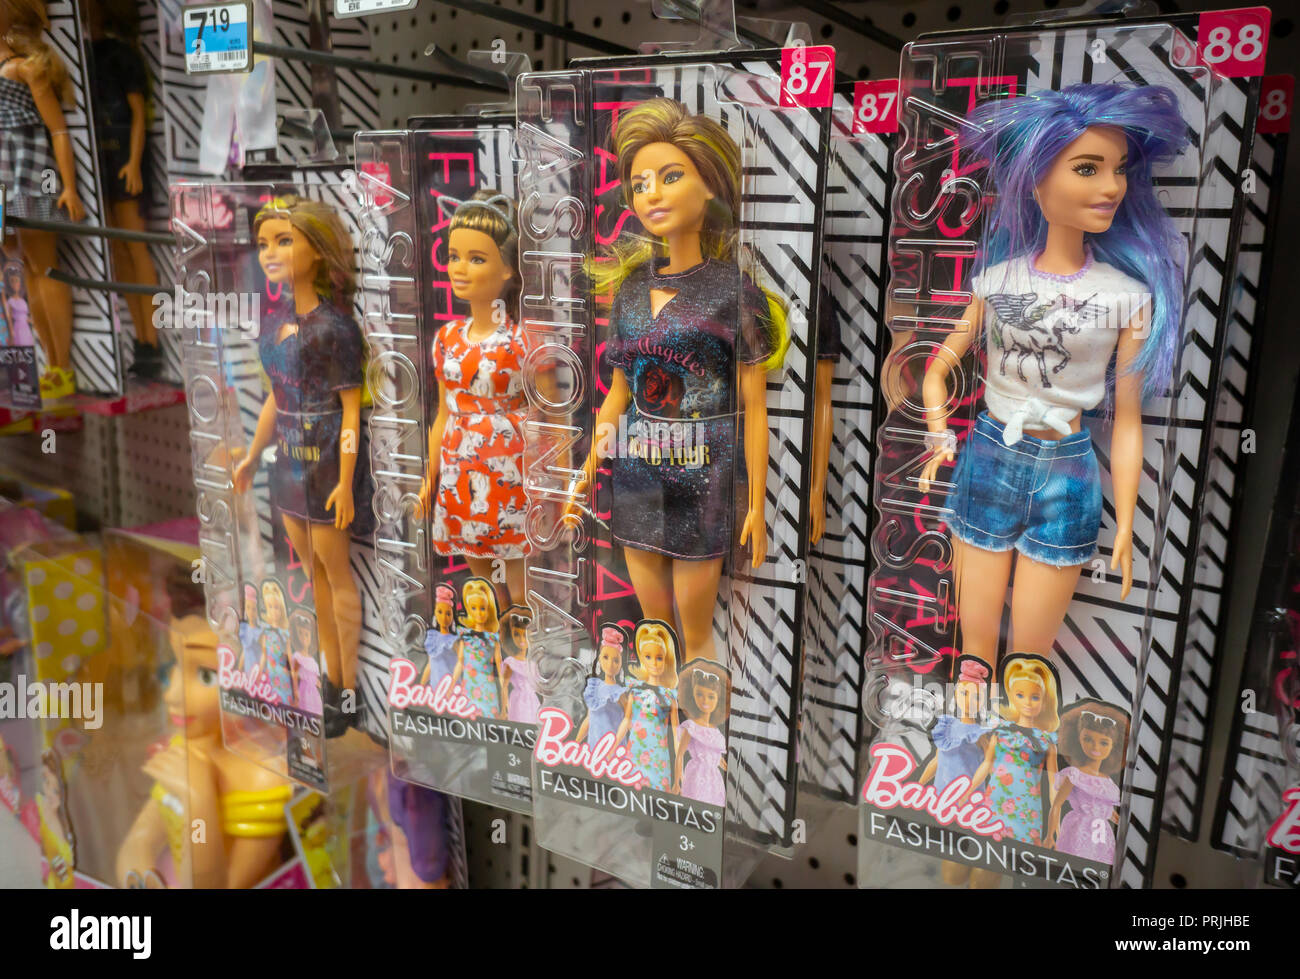 An assortment of various Mattel Barbie Dolls in a KMart store in New York  on Friday, September 28, 2018. Wth the demise of Toys R Us many retailers  are ramping up their